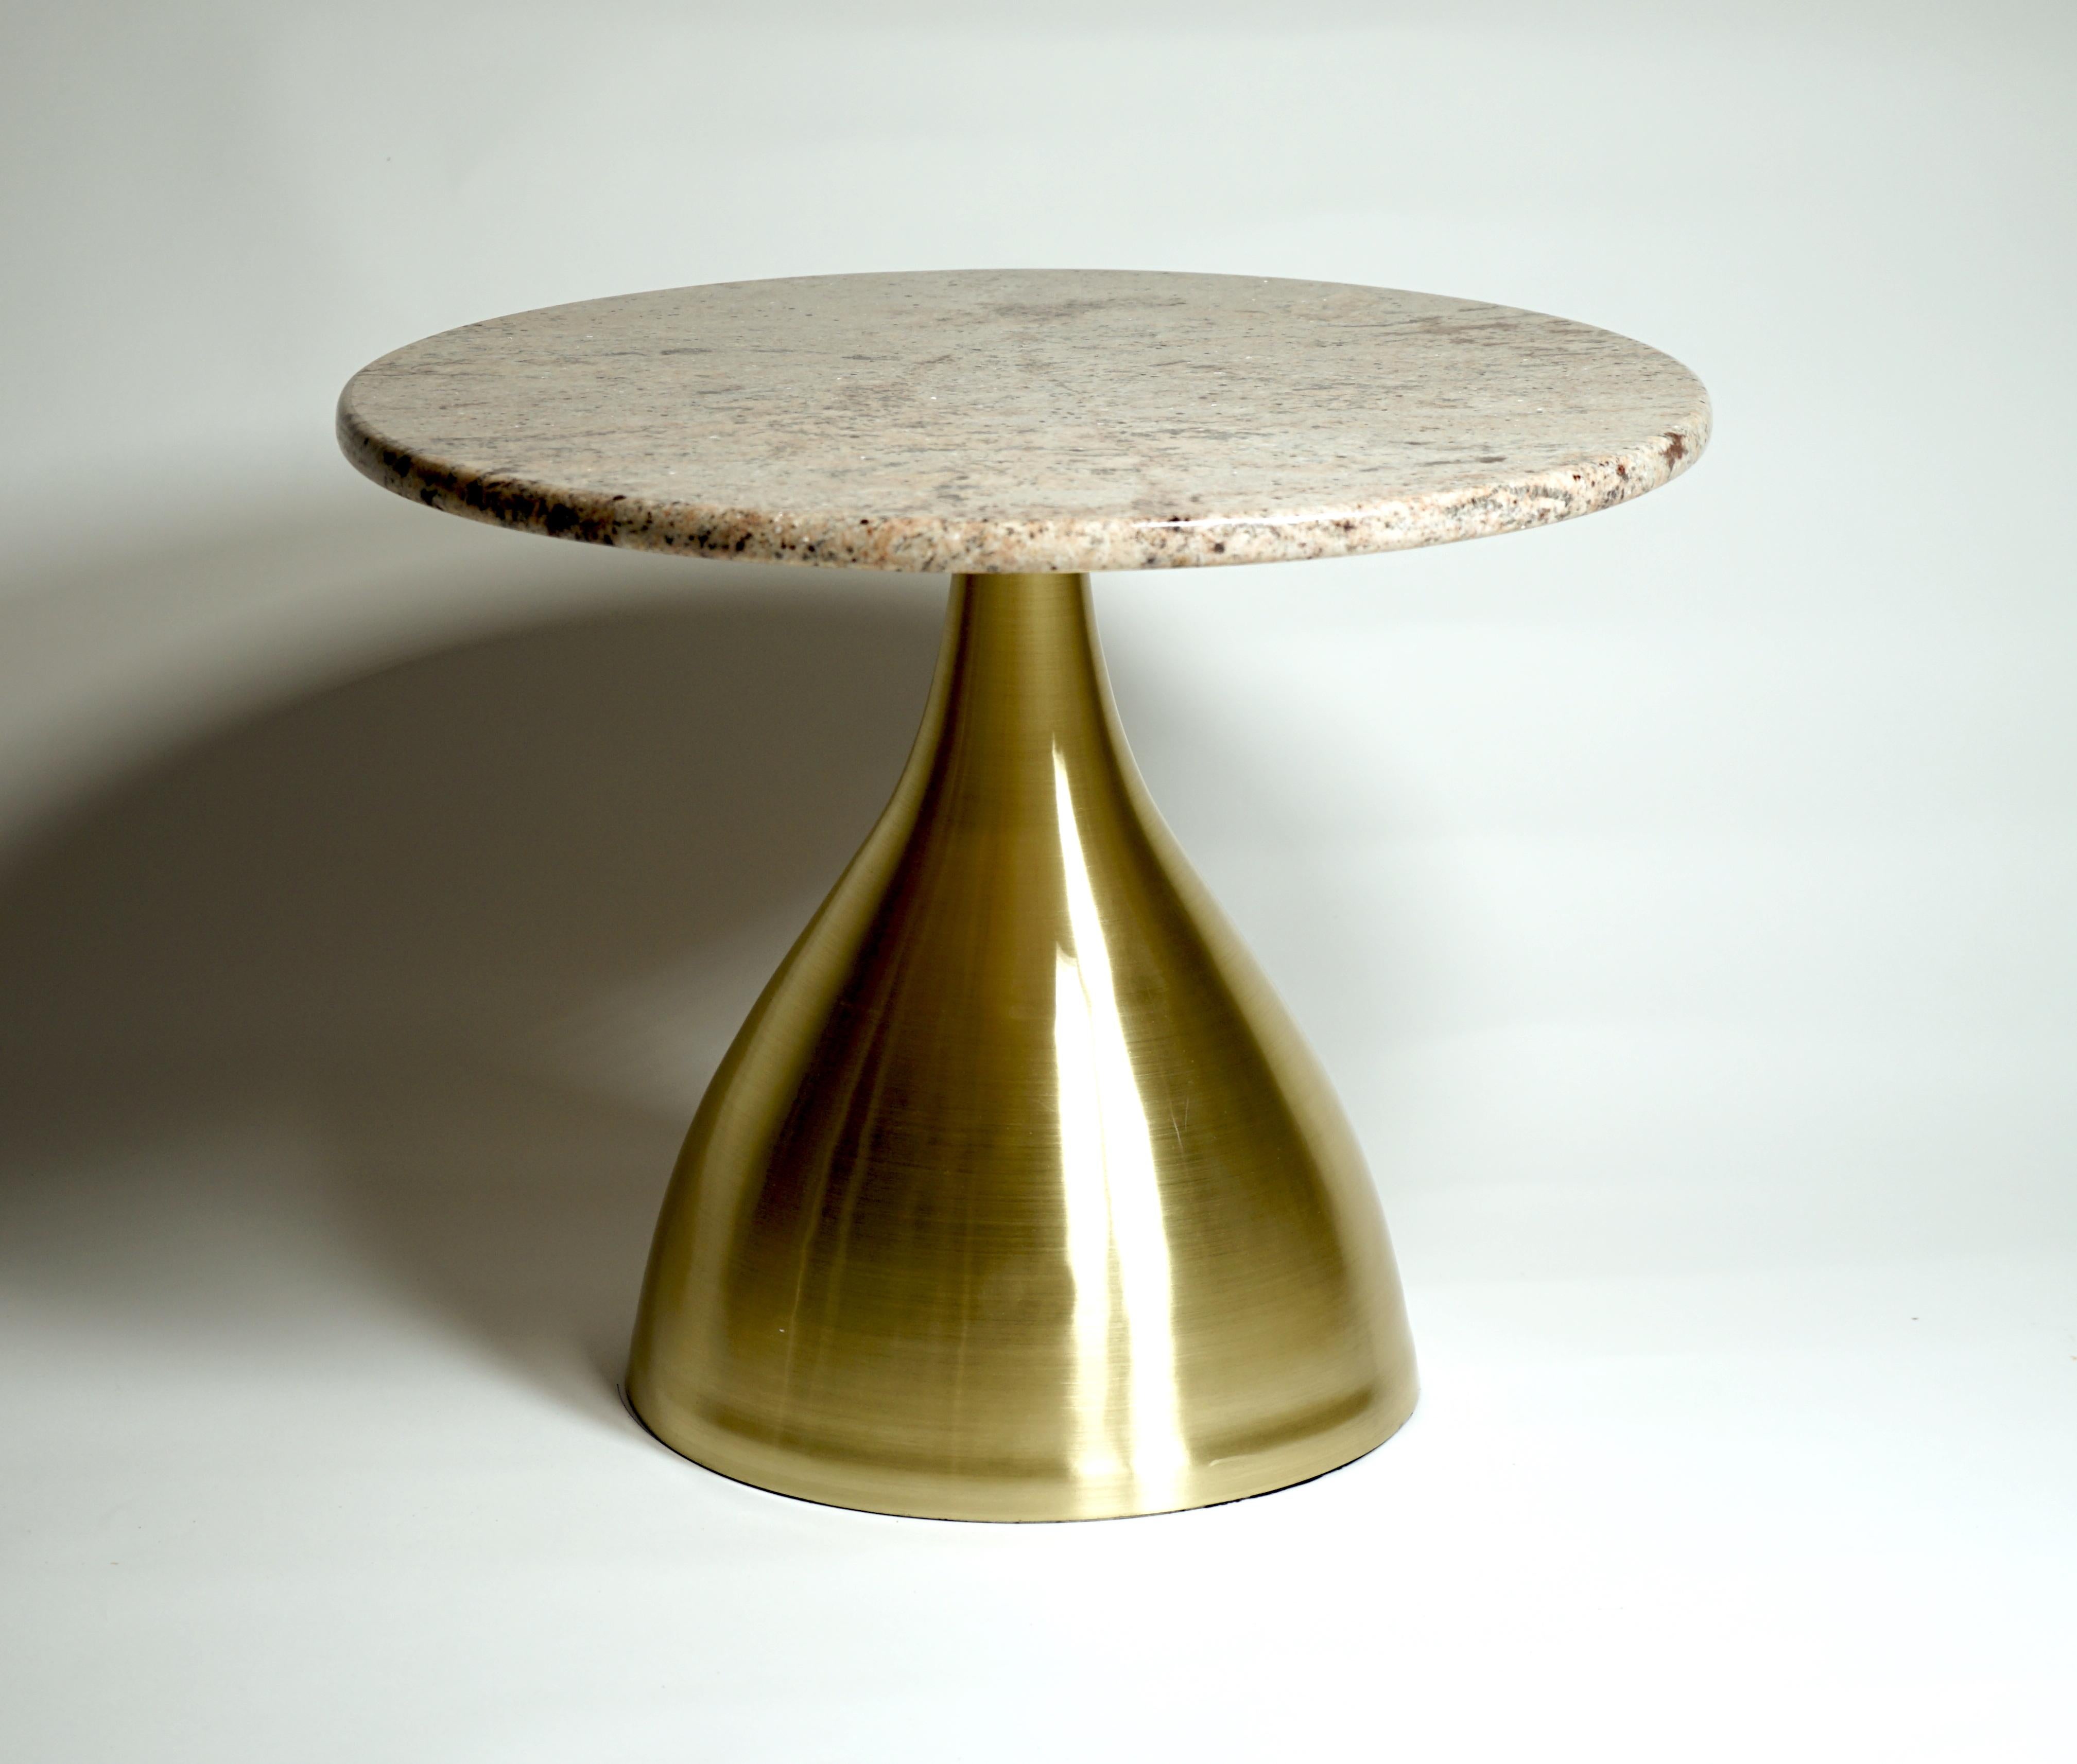 Coffee table model Mushroom designed by Studio Superego for Superego Editions. Low table handmade with satin brass leg and Sahara marble top.

Biography
Superego editions was born in 2006, performing a constant activity of research in decorative